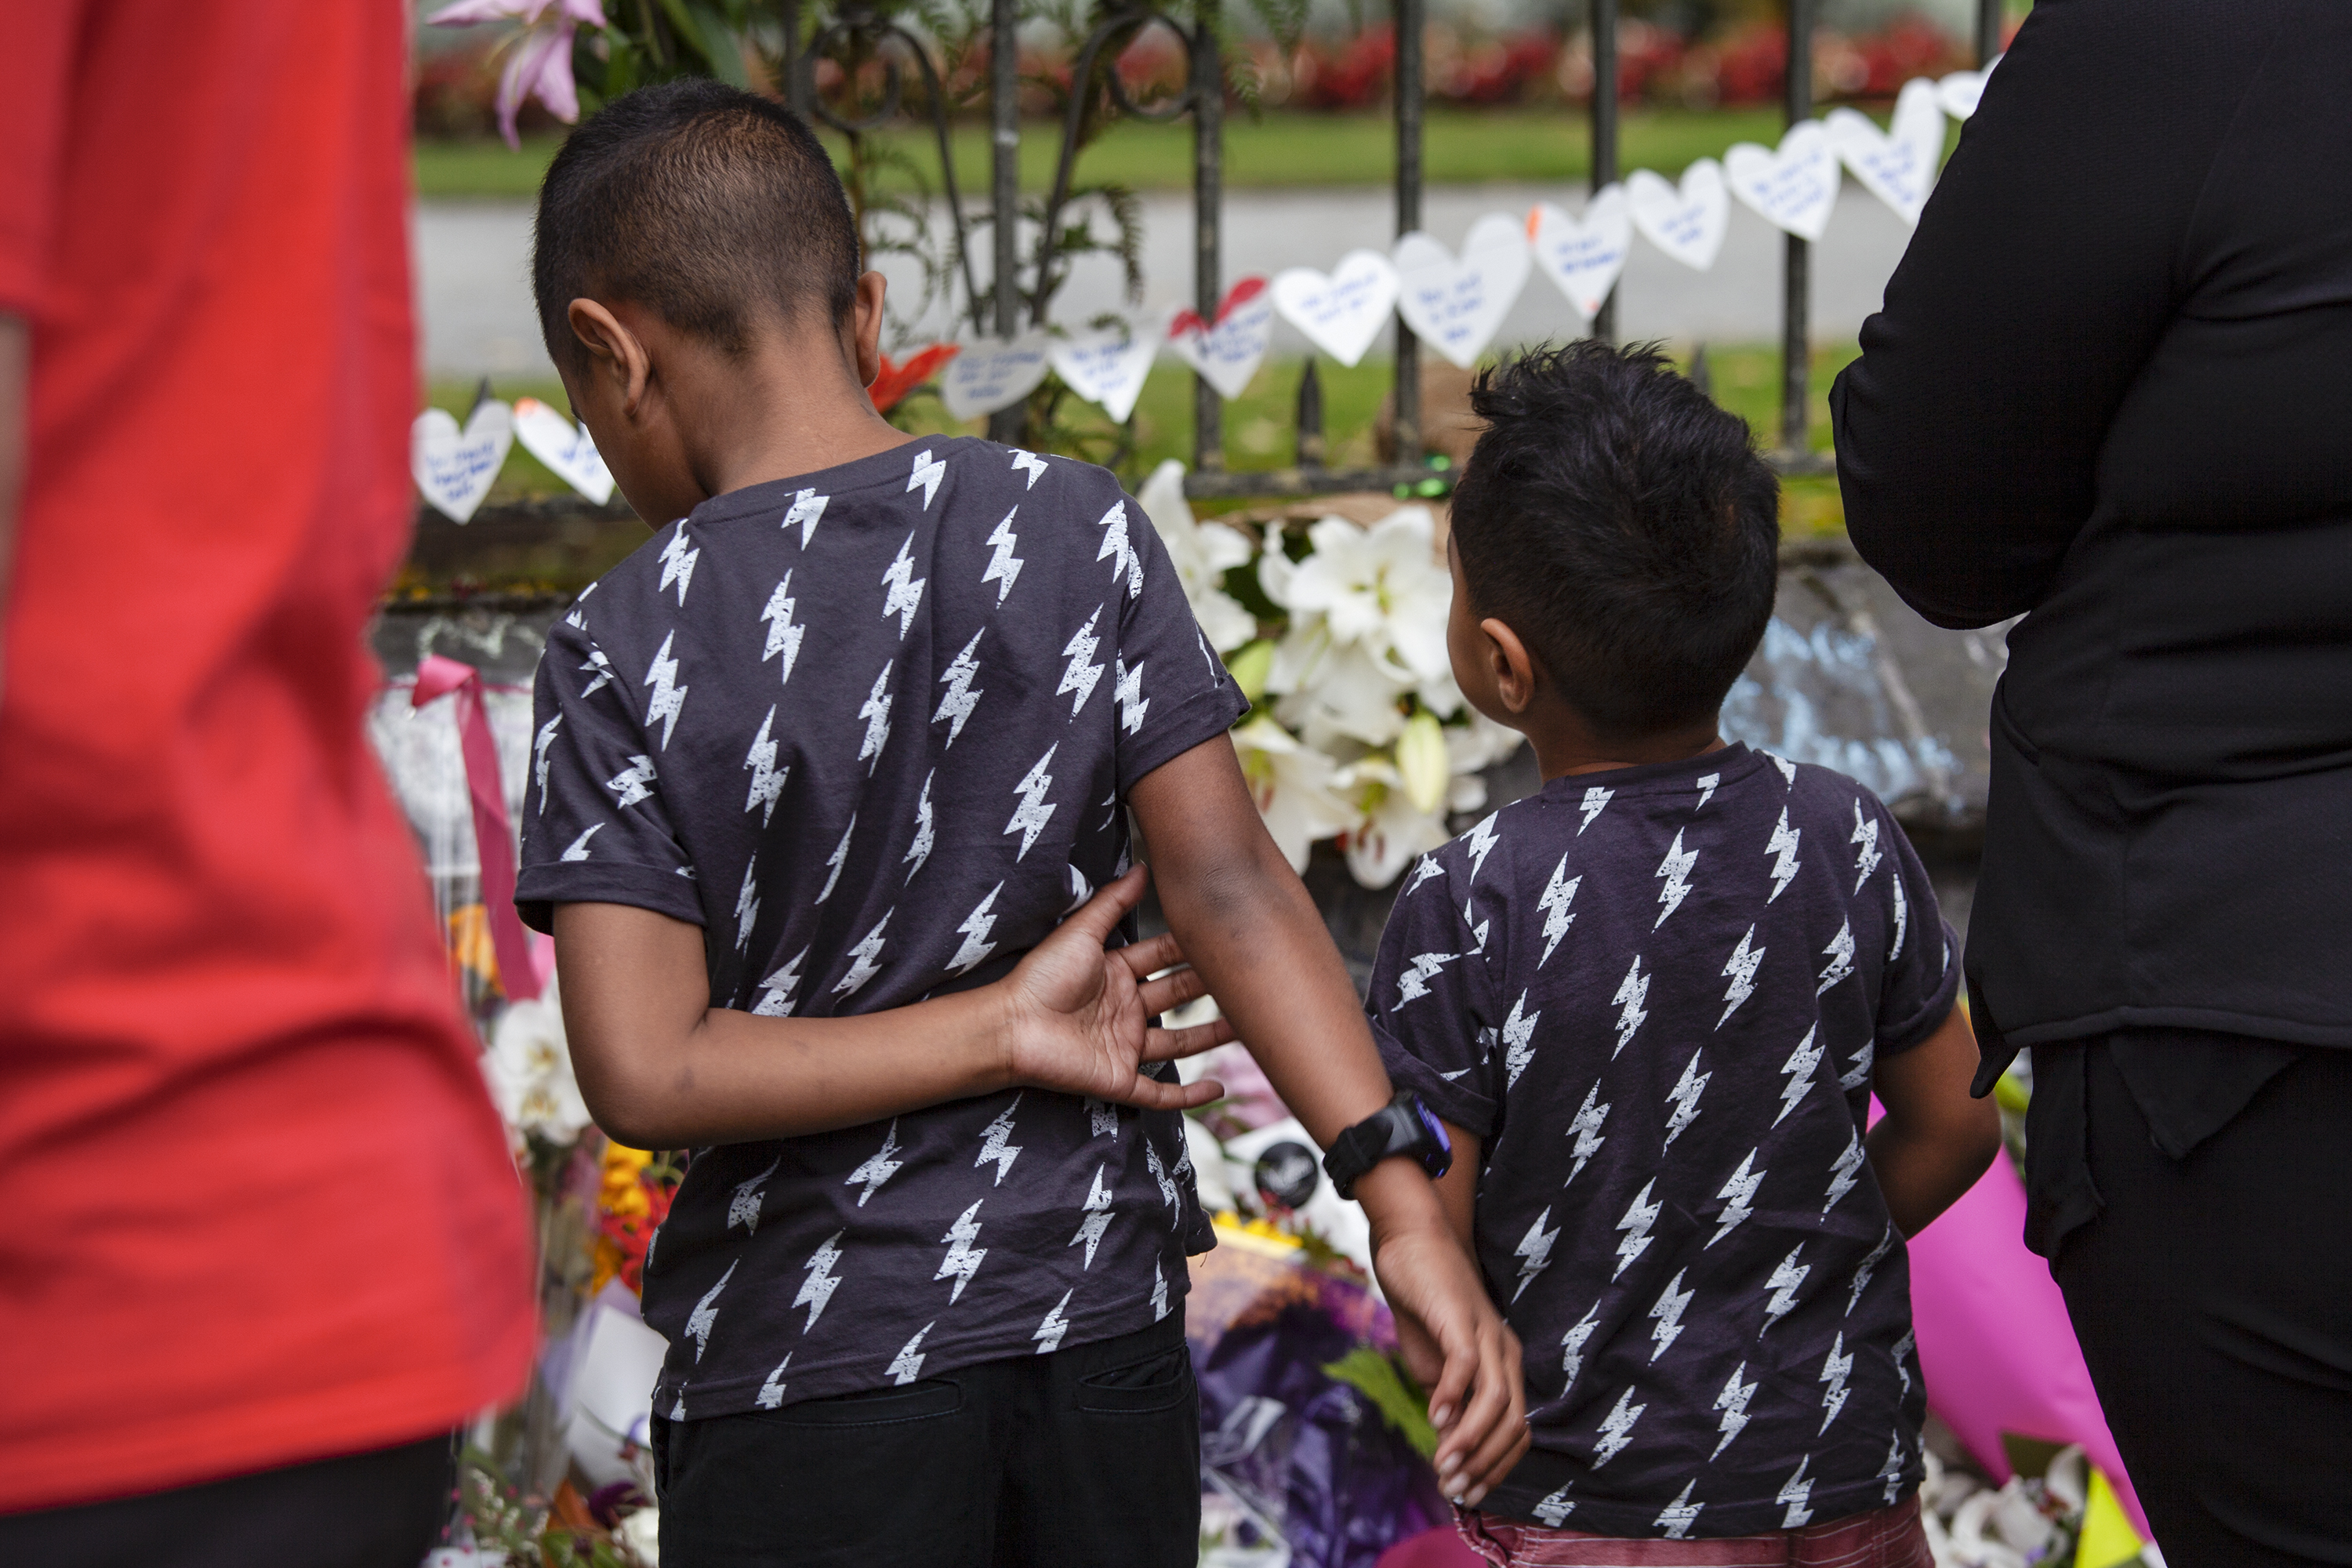 Two young boys in matching lightning bolt shirts stand with adults and view the flowers and messages.